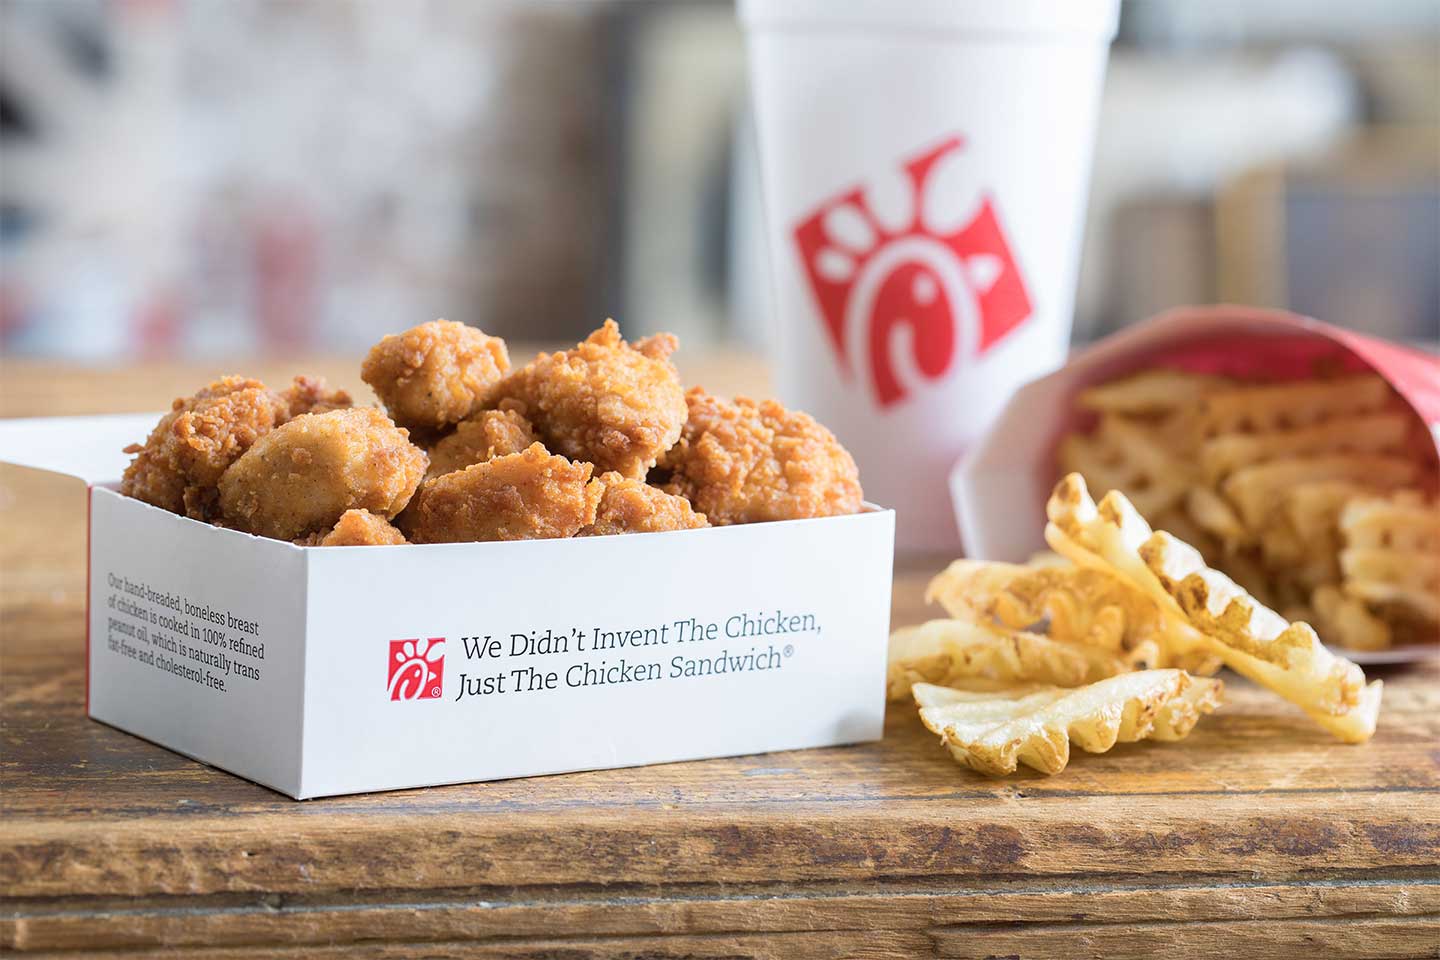 Mark your calendar: Free Chick-fil-A Nuggets this January | Chick-fil-A